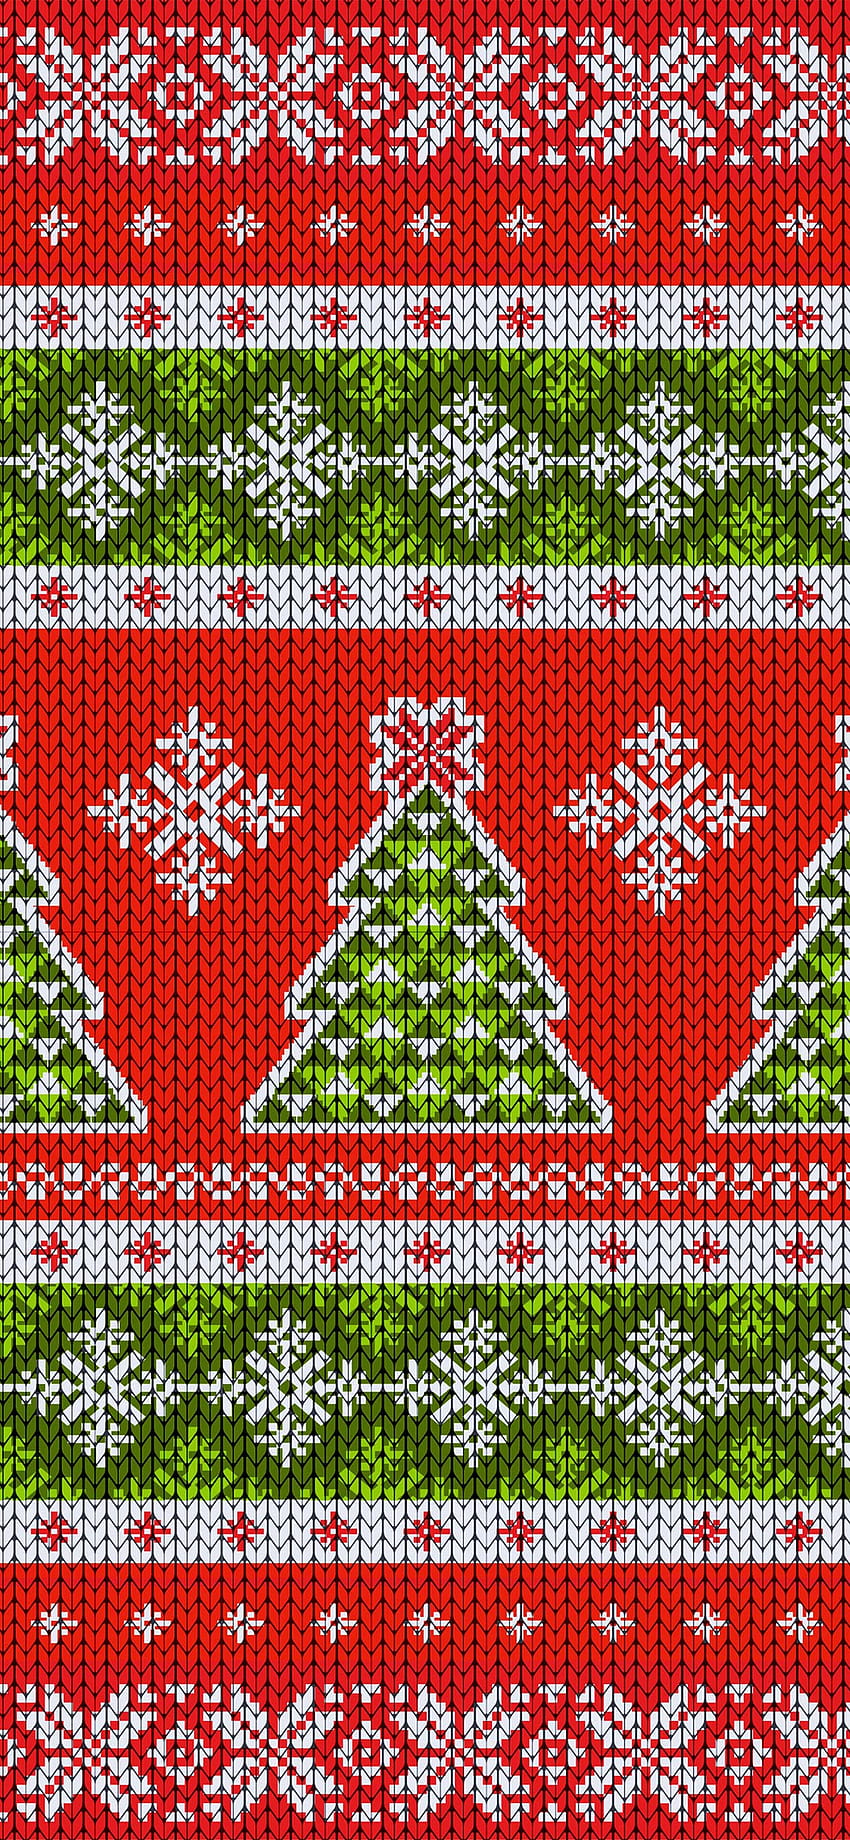 MASEY - Christmas “Ugly Sweater” NHL iPhone Wallpapers //